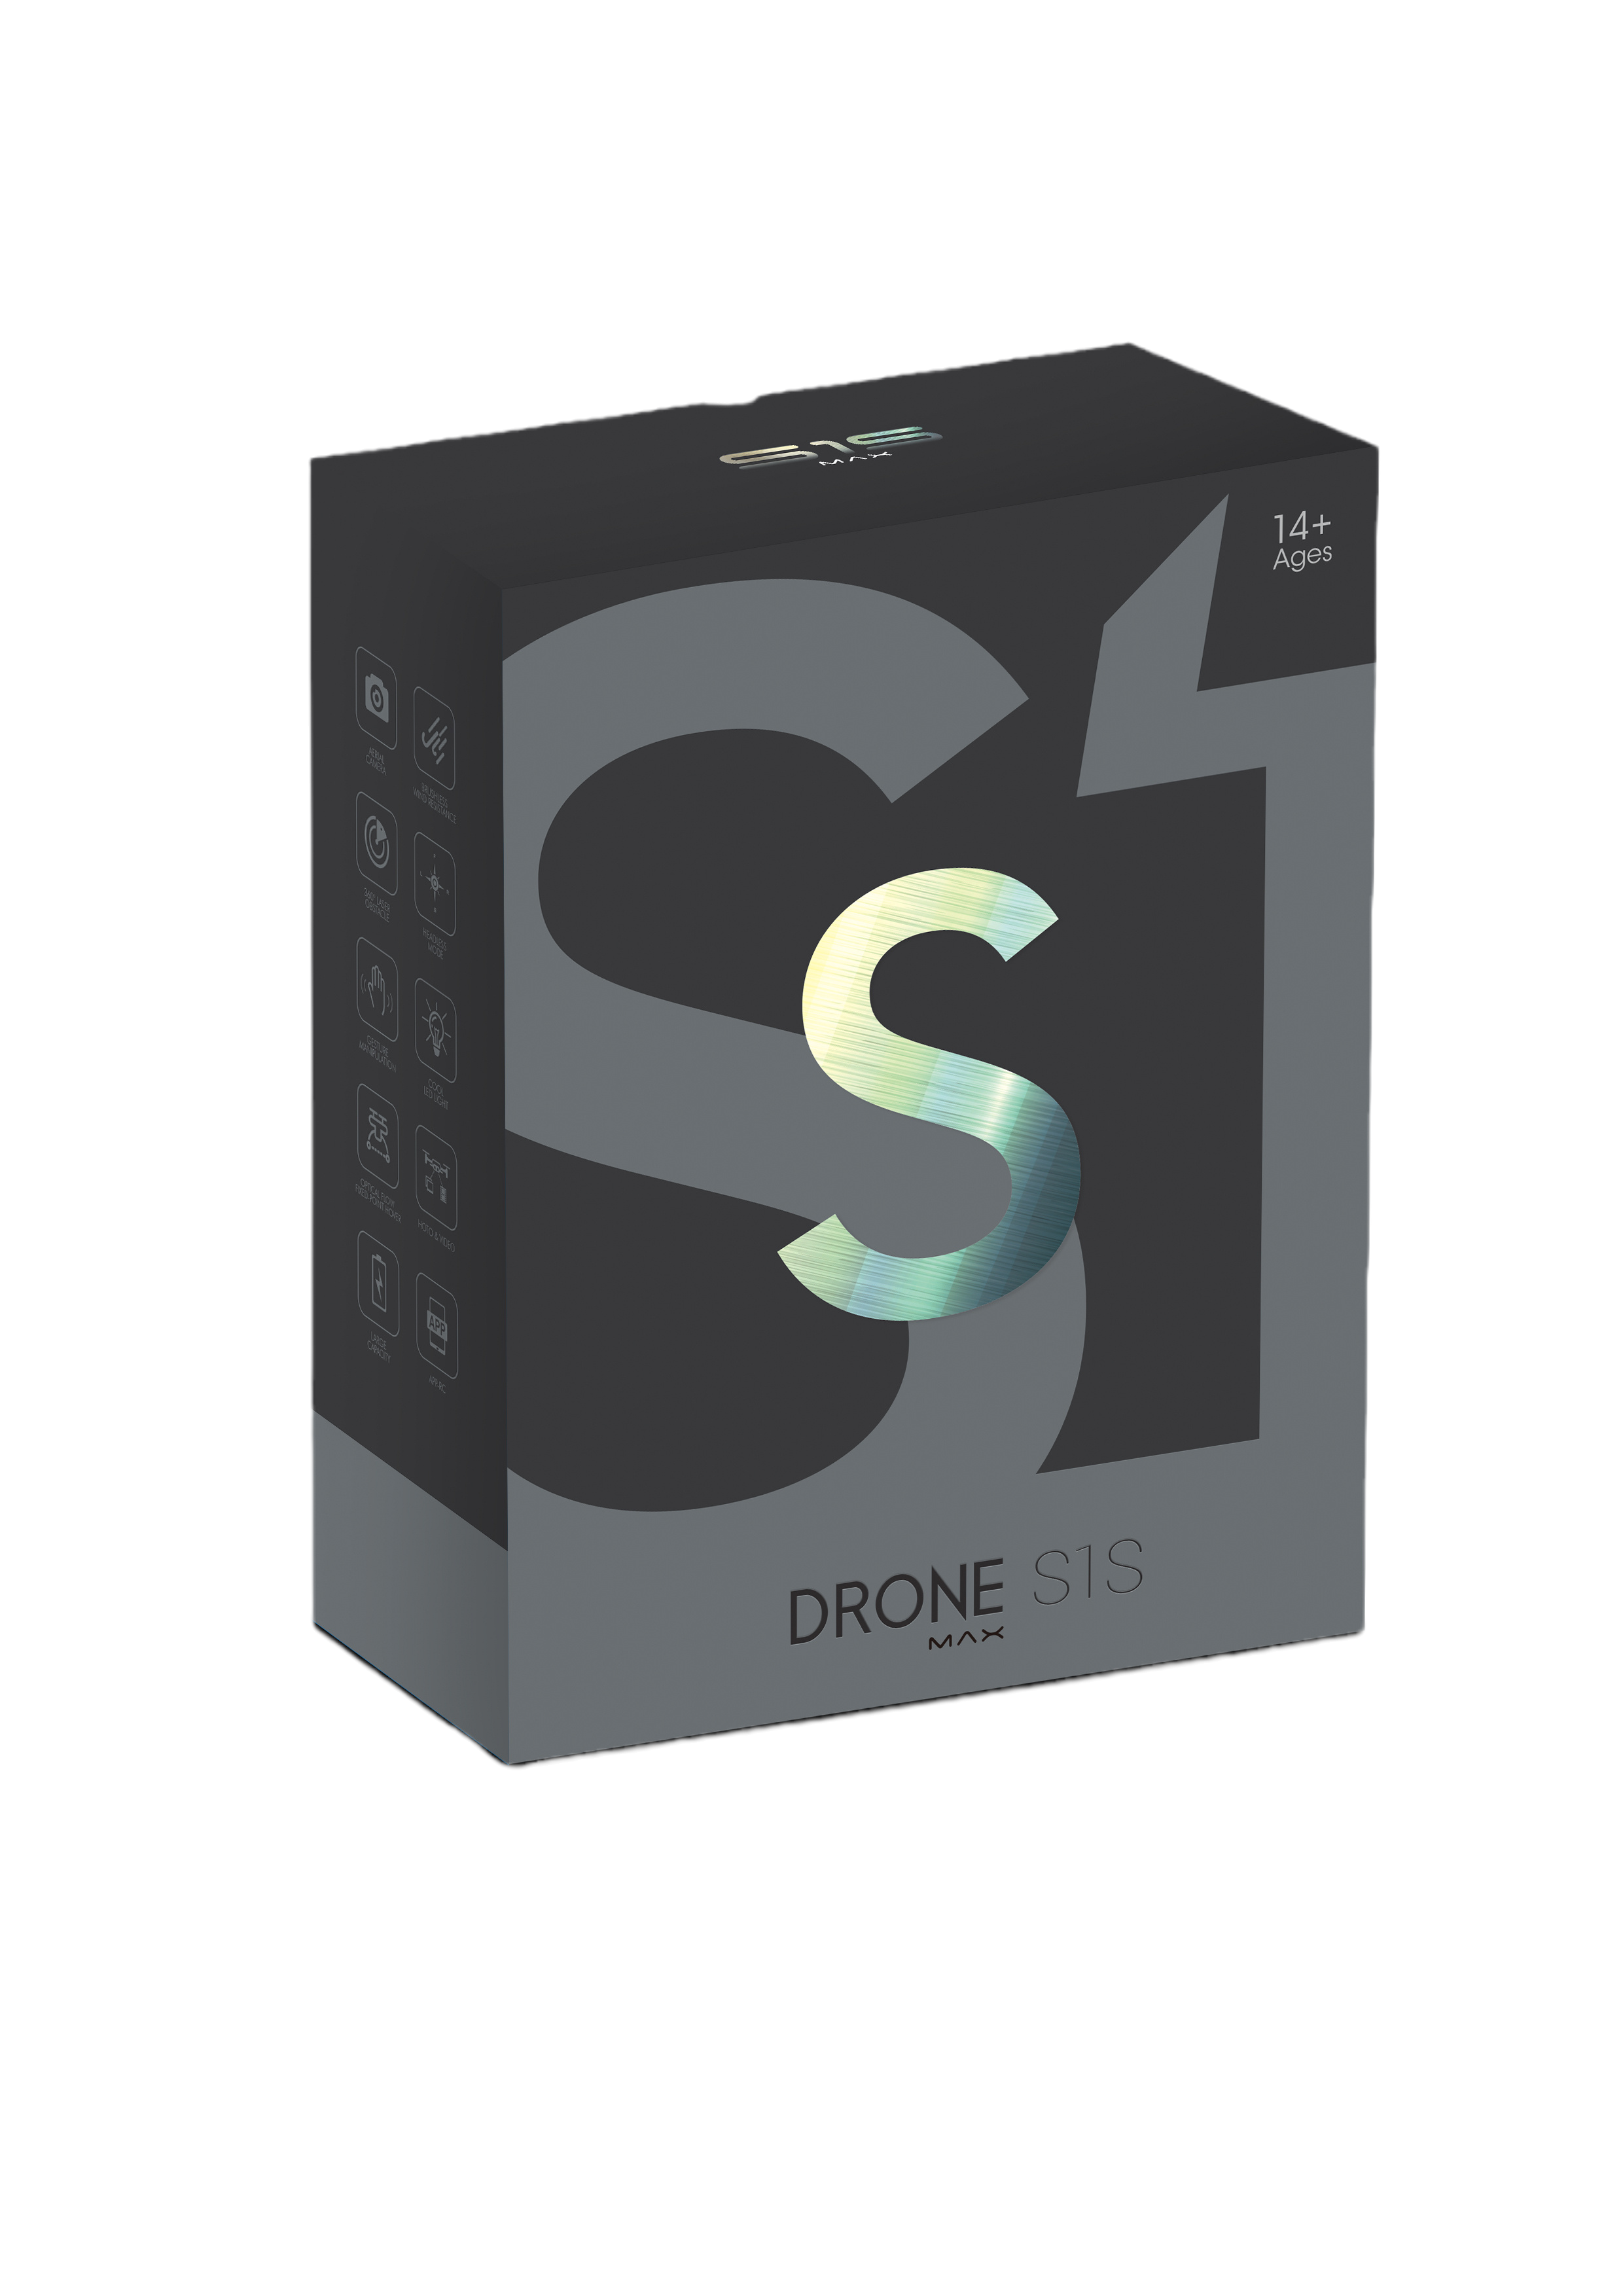 S1S Drone